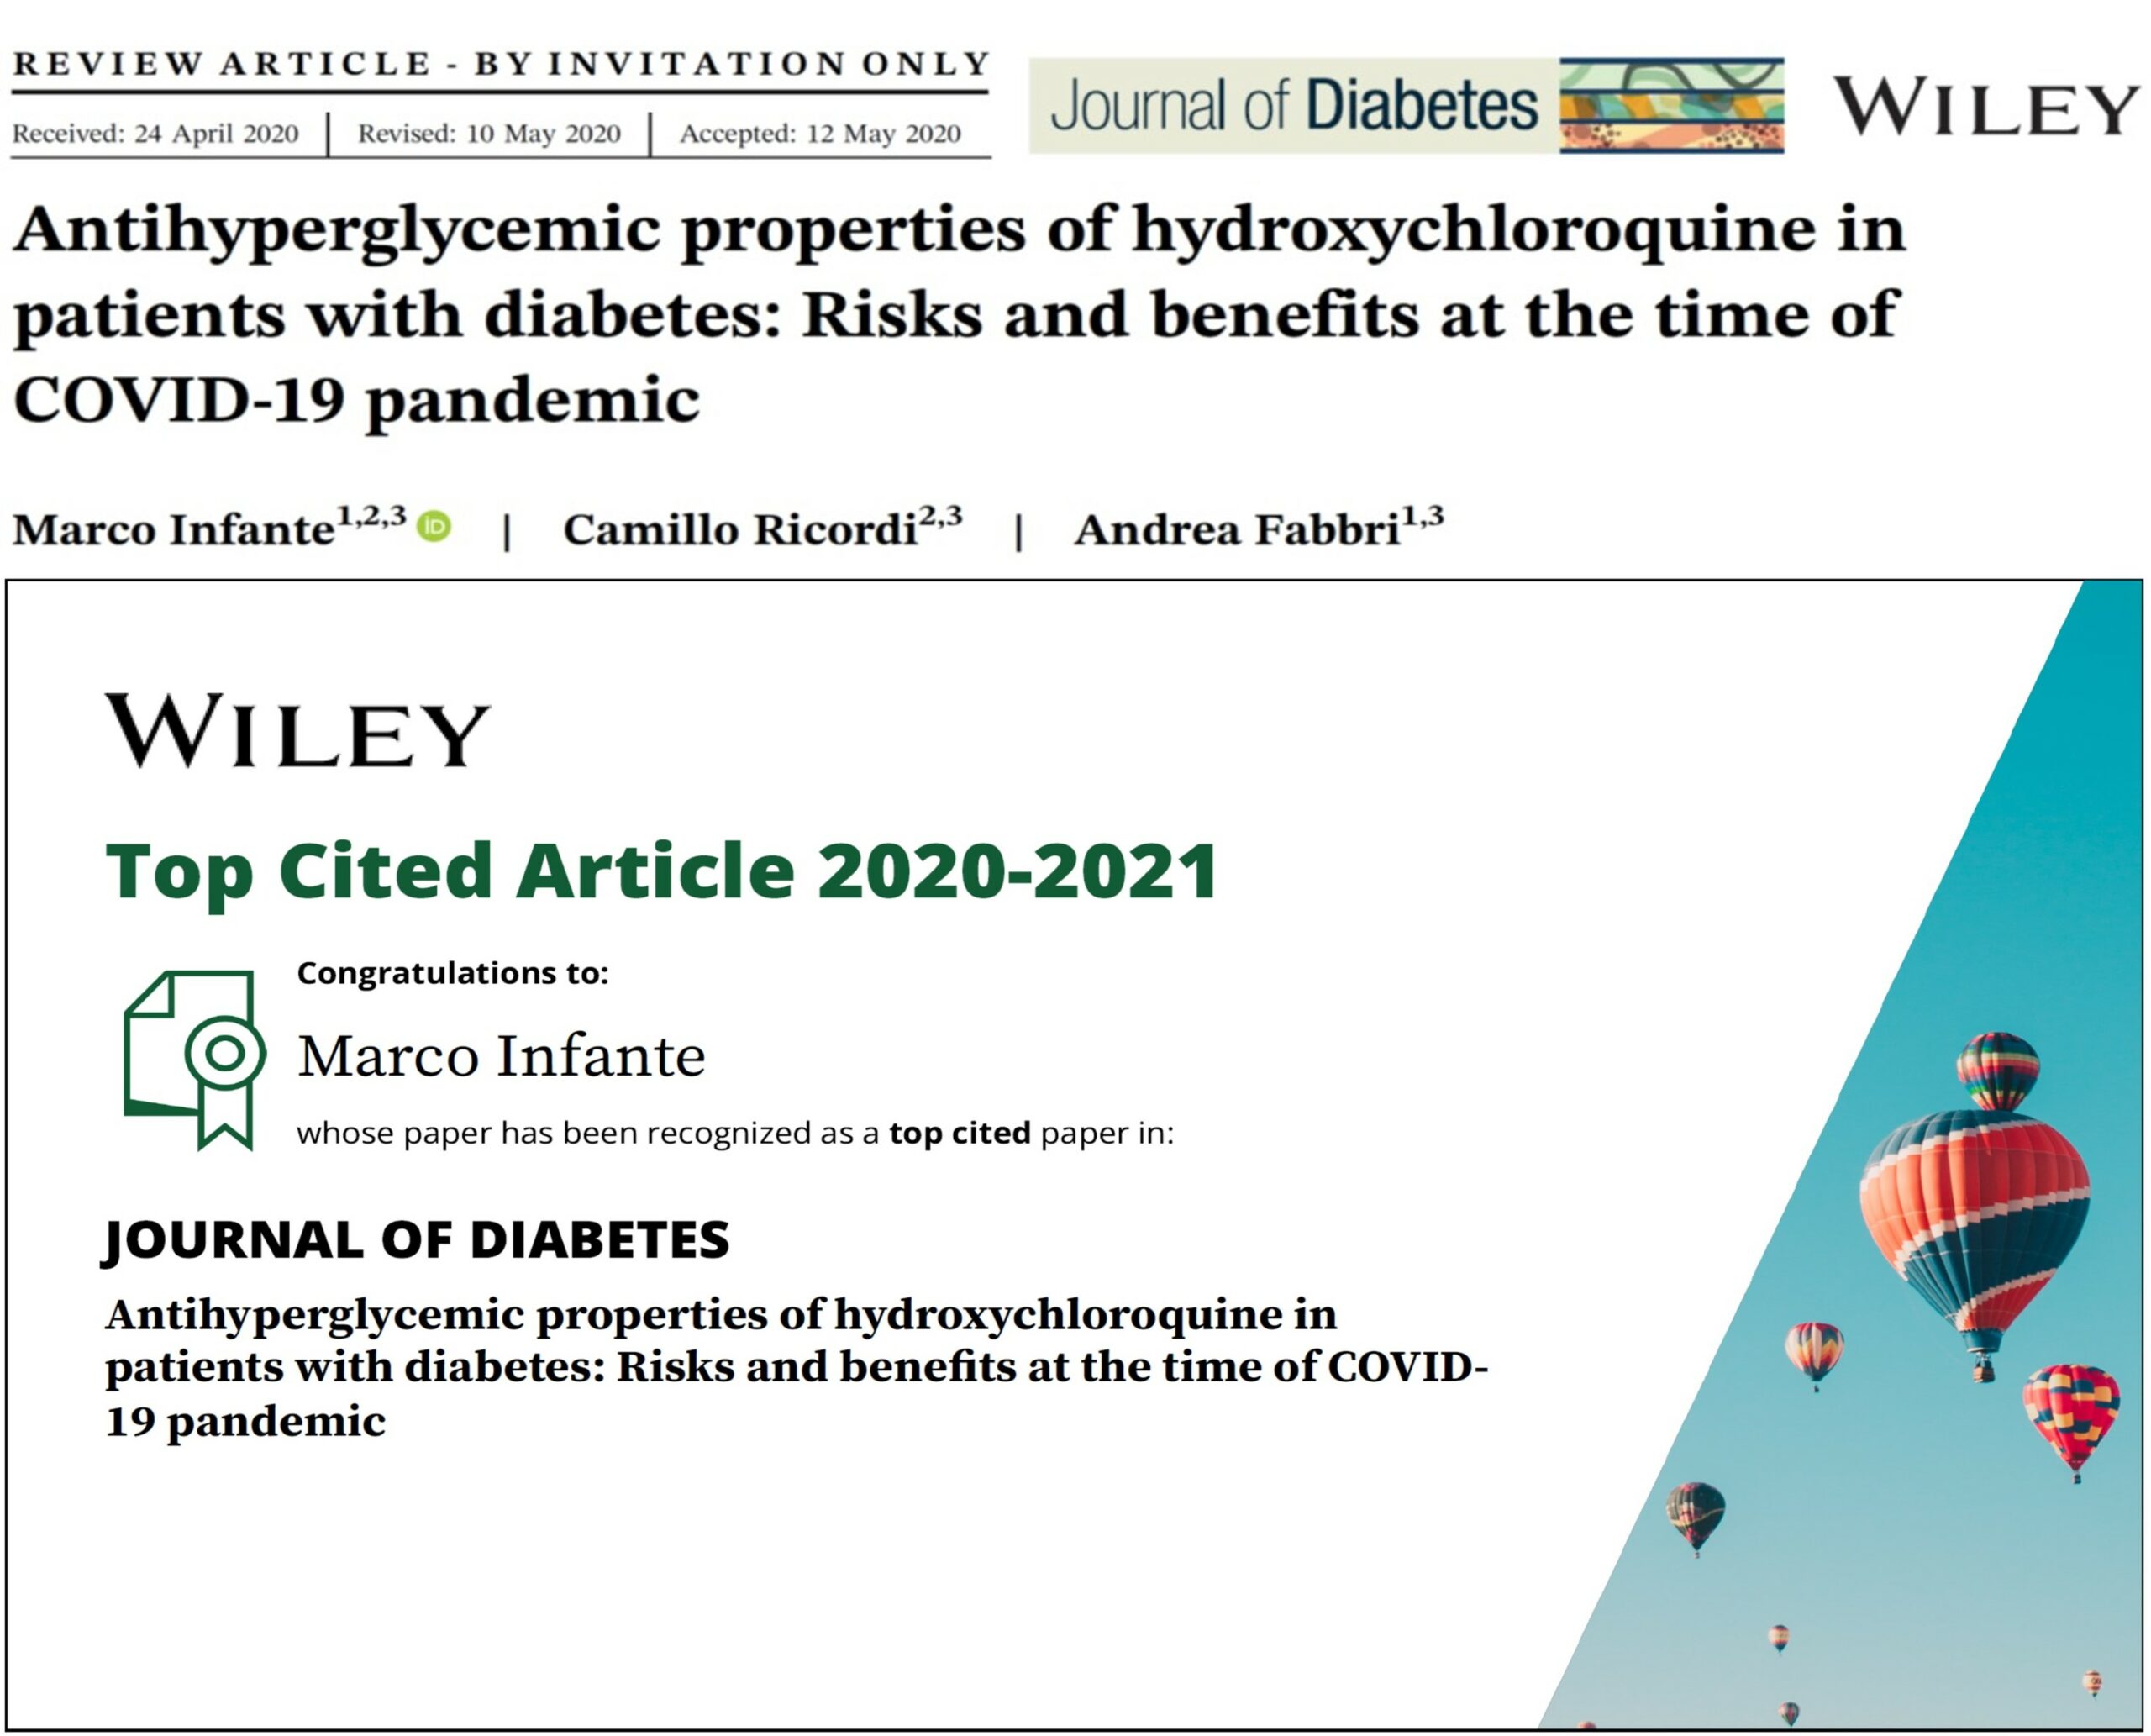 “Antihyperglycemic properties of hydroxychloroquine in patients with diabetes: Risks and benefits at the time of COVID-19 pandemic” tra i Top Cited Papers 2020-2021 in Journal of Diabetes”